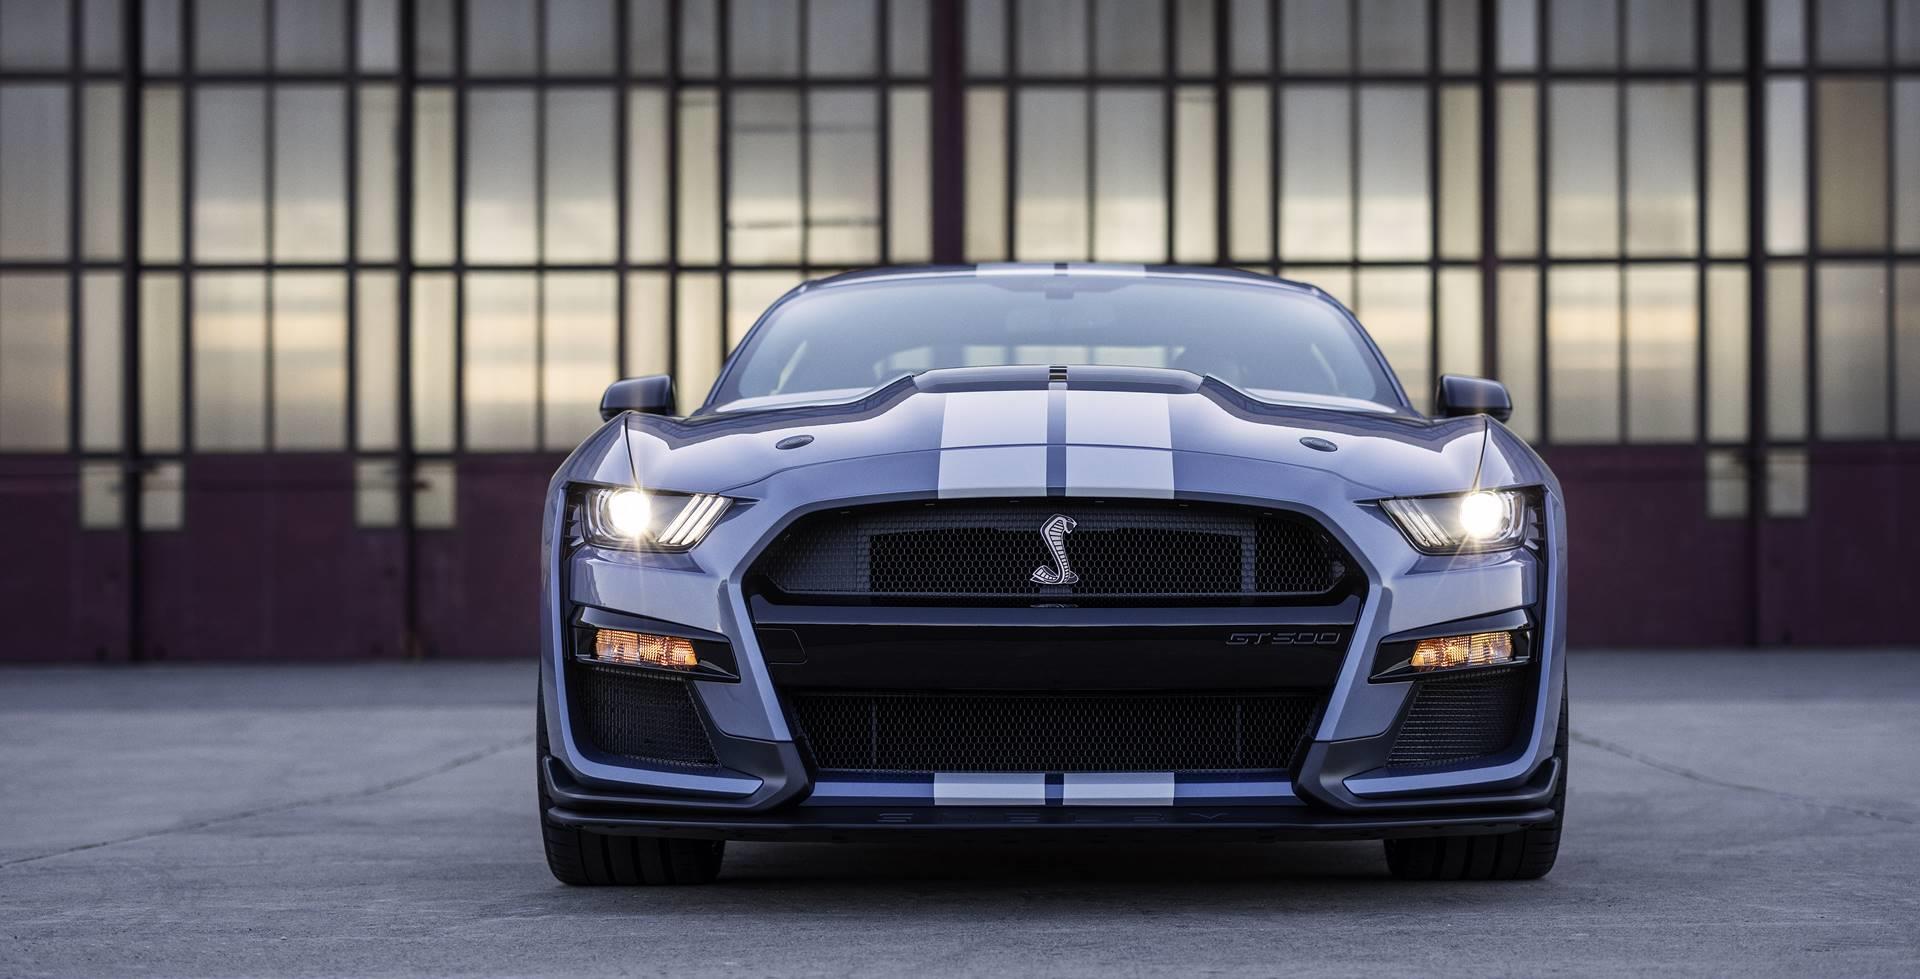 2022 Ford Mustang Shelby GT500 Heritage Edition Image. Photo 1 of 21